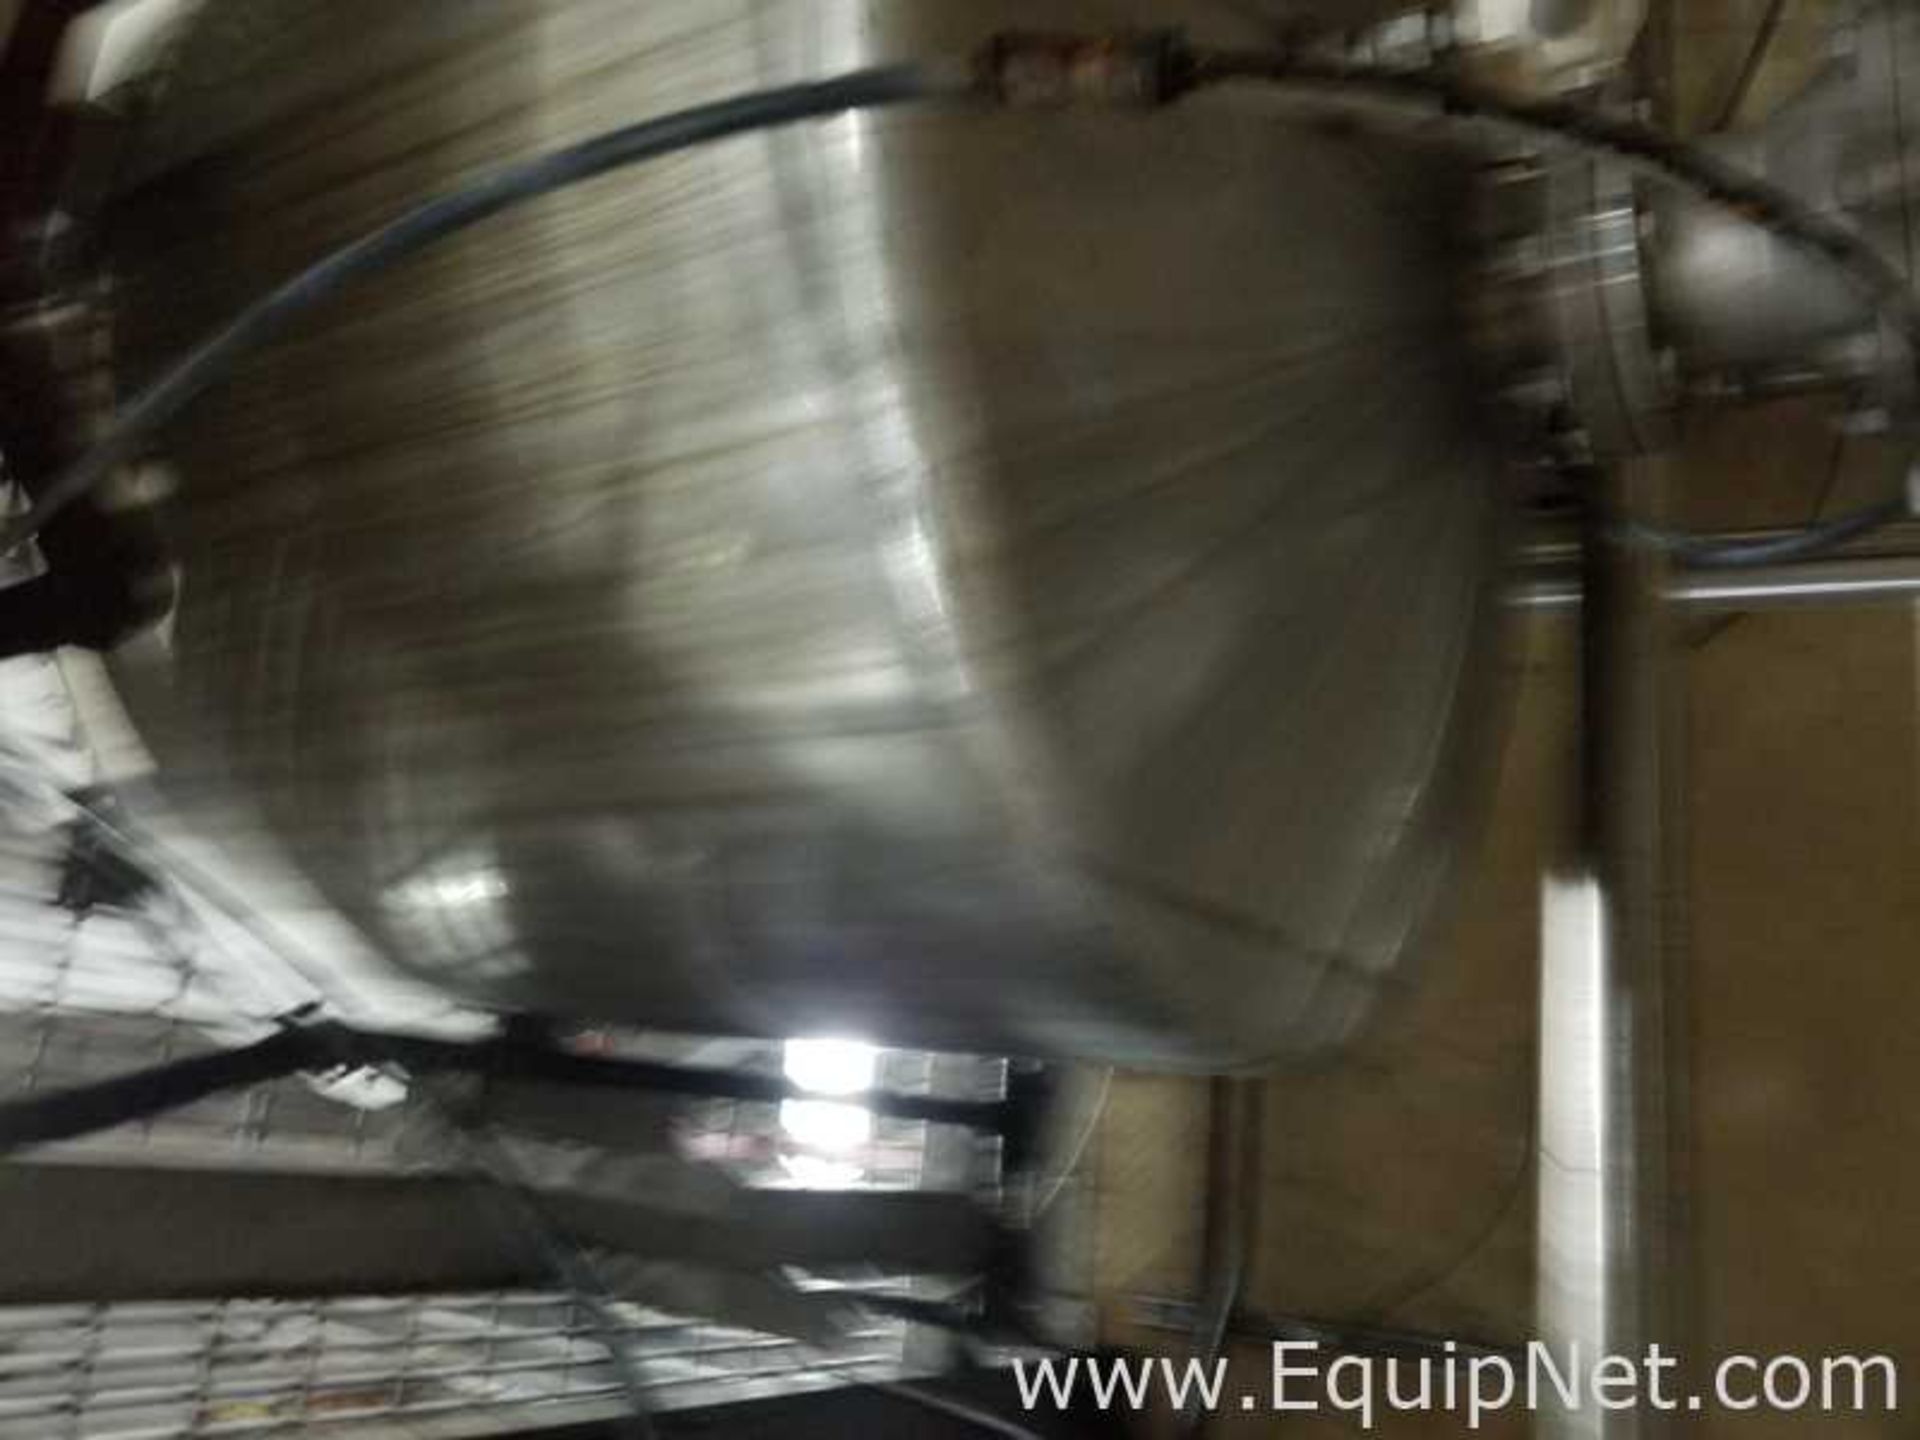 EQUIPNET LISTING #722950; REMOVAL COST: $3,300.00; DESCRIPTION: Stainless Steel 300 Gallon Steam - Image 6 of 7